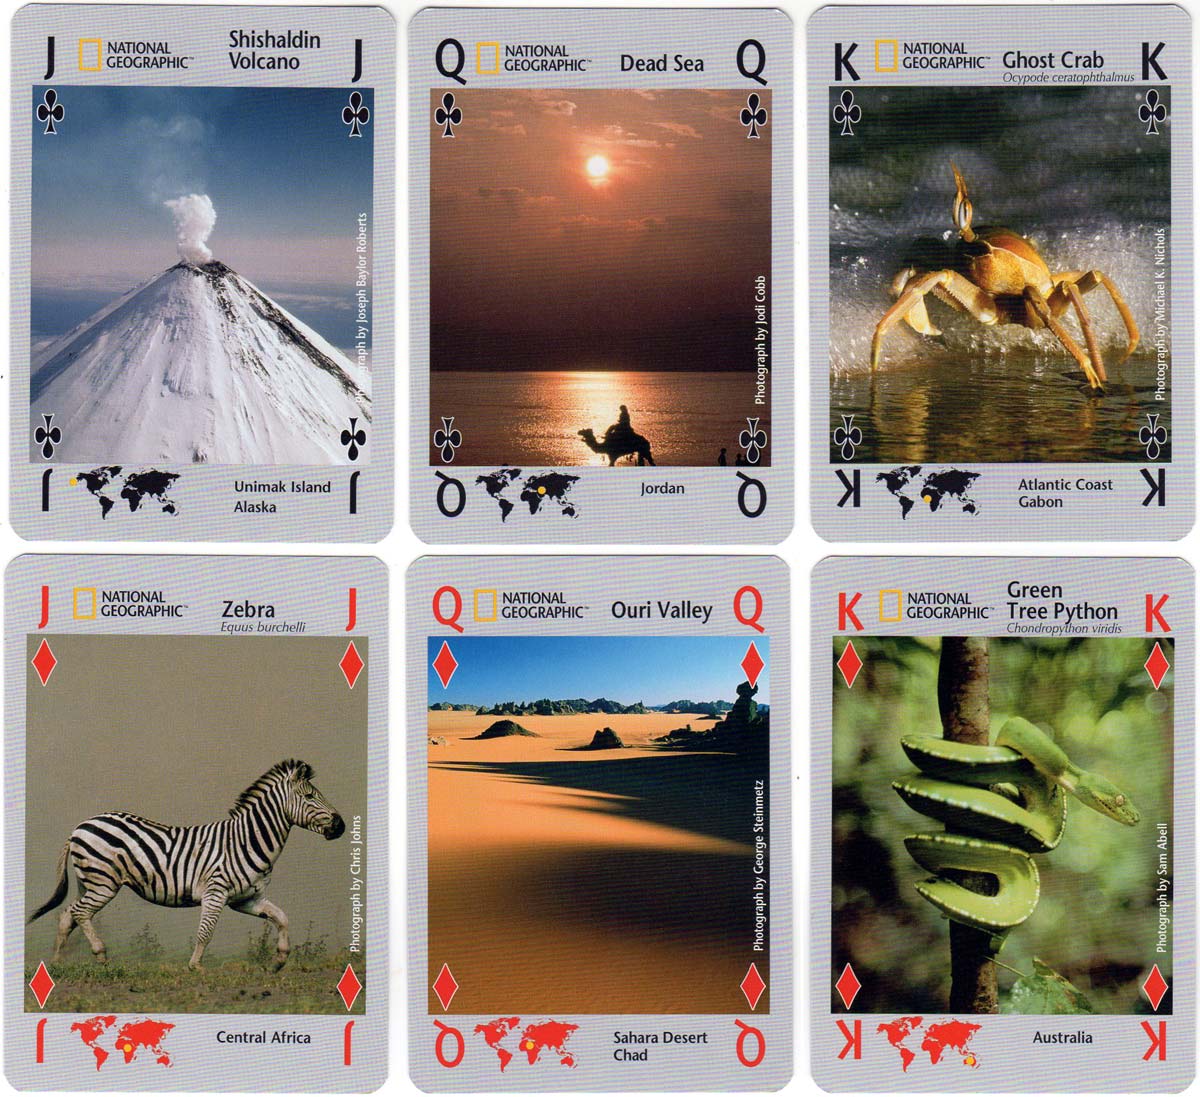 National Geographic Nature playing cards, 2006